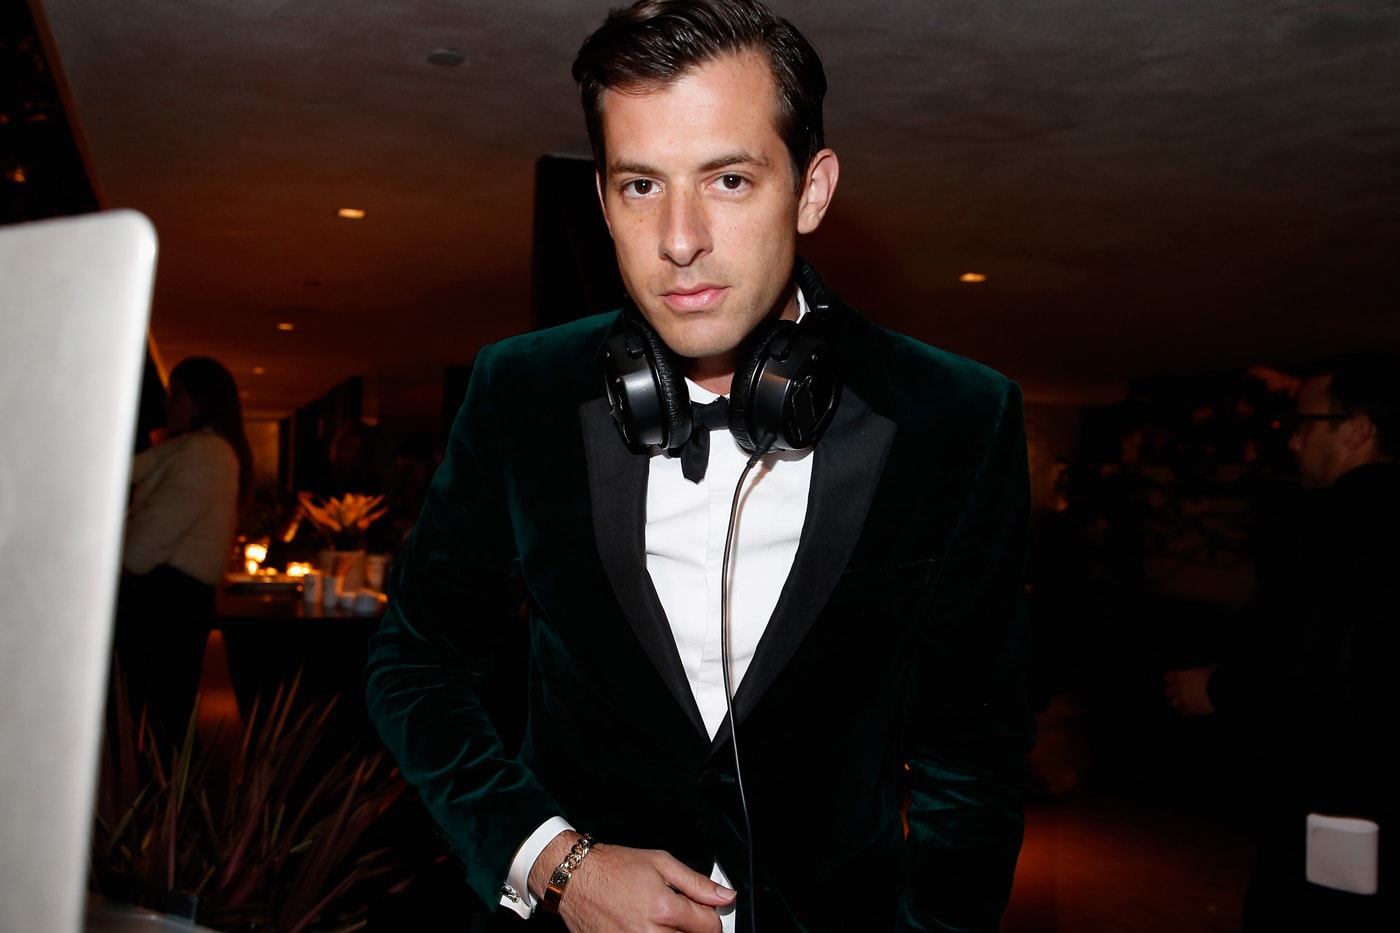 Mark Ronson and Tame Impala's Mark Ronson, "Summer Breaking/Daffodils"Video